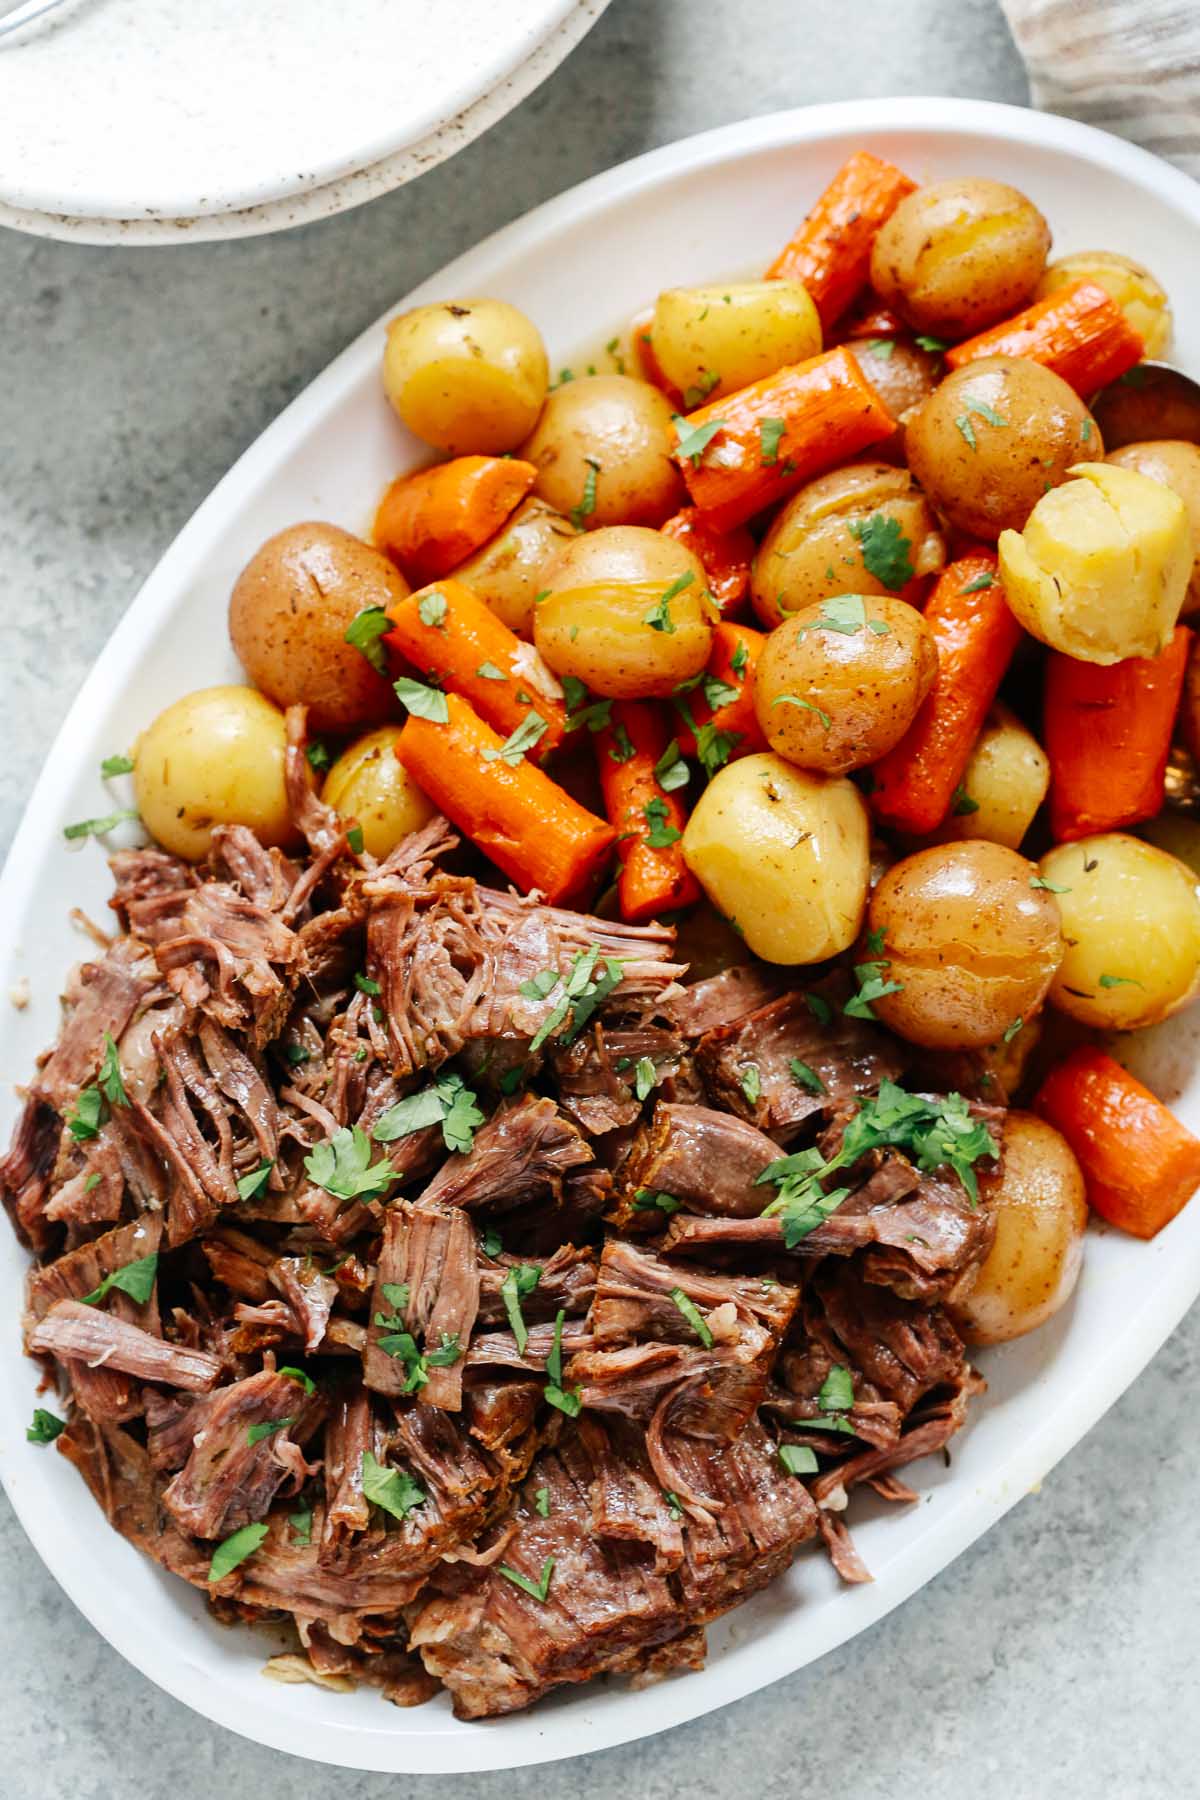 Pressure cooker pot roast recipe in a white serving plate with carrots and potatoes.